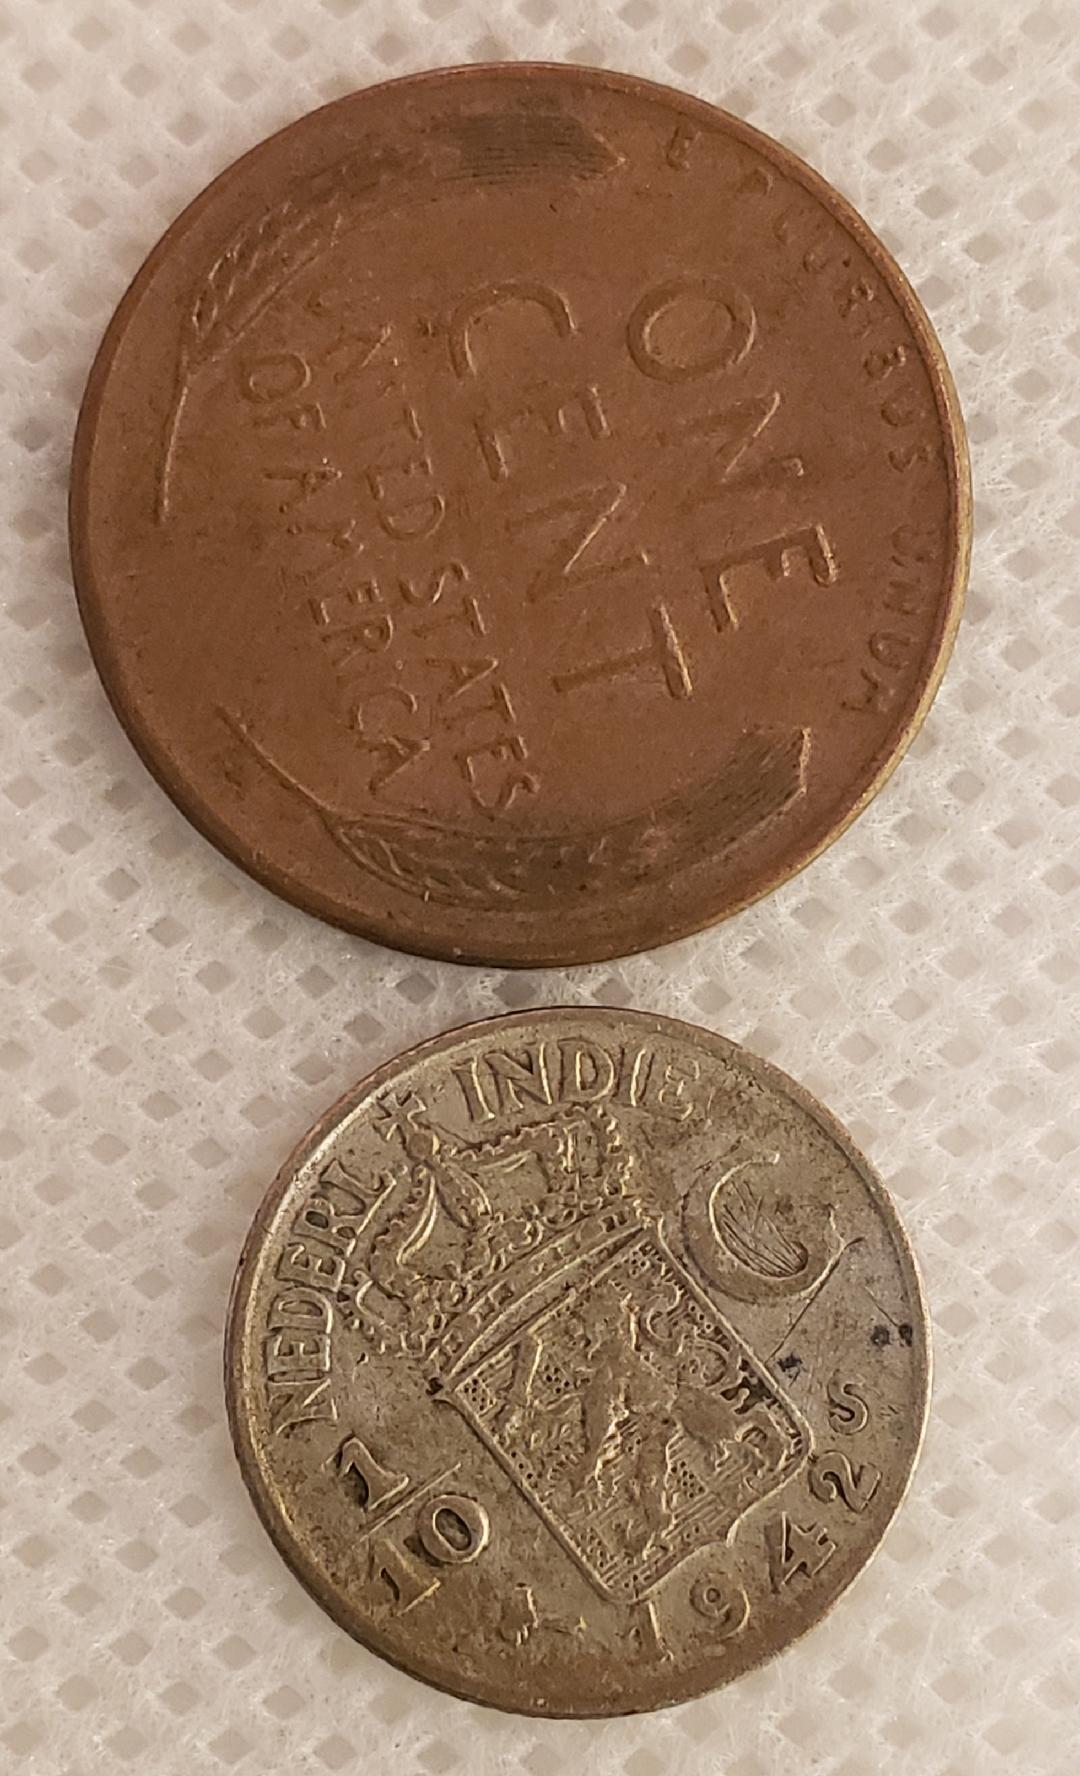 netherlands coin compare.jpg